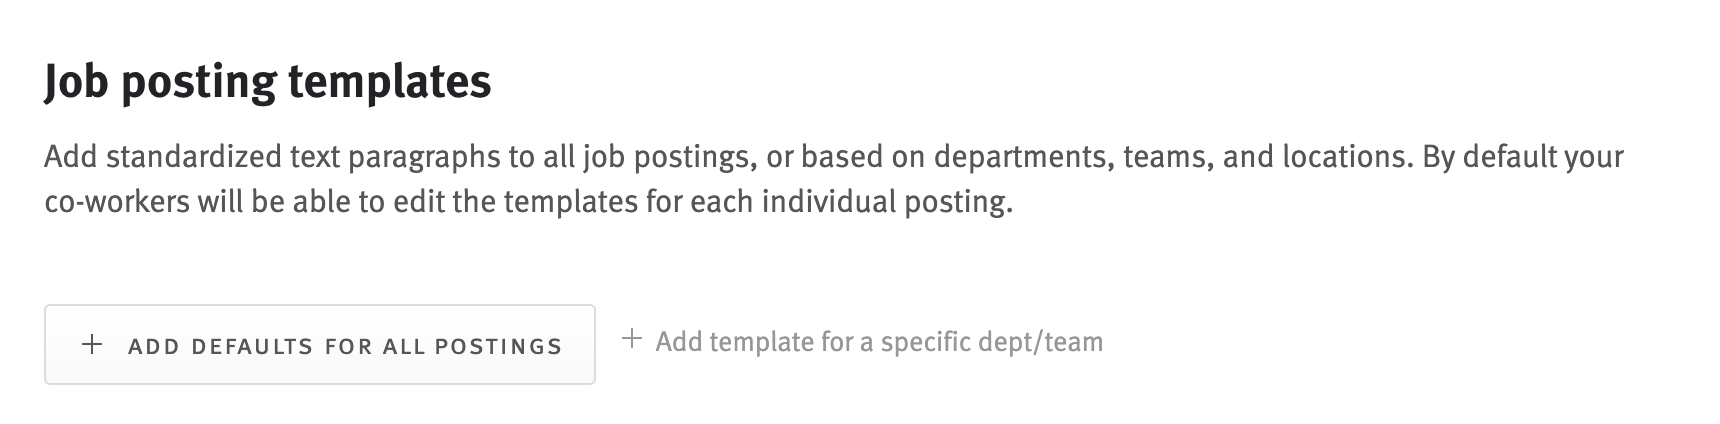 Posting templates settings with buttons to add default posting templates and templates for specific departments and teams.